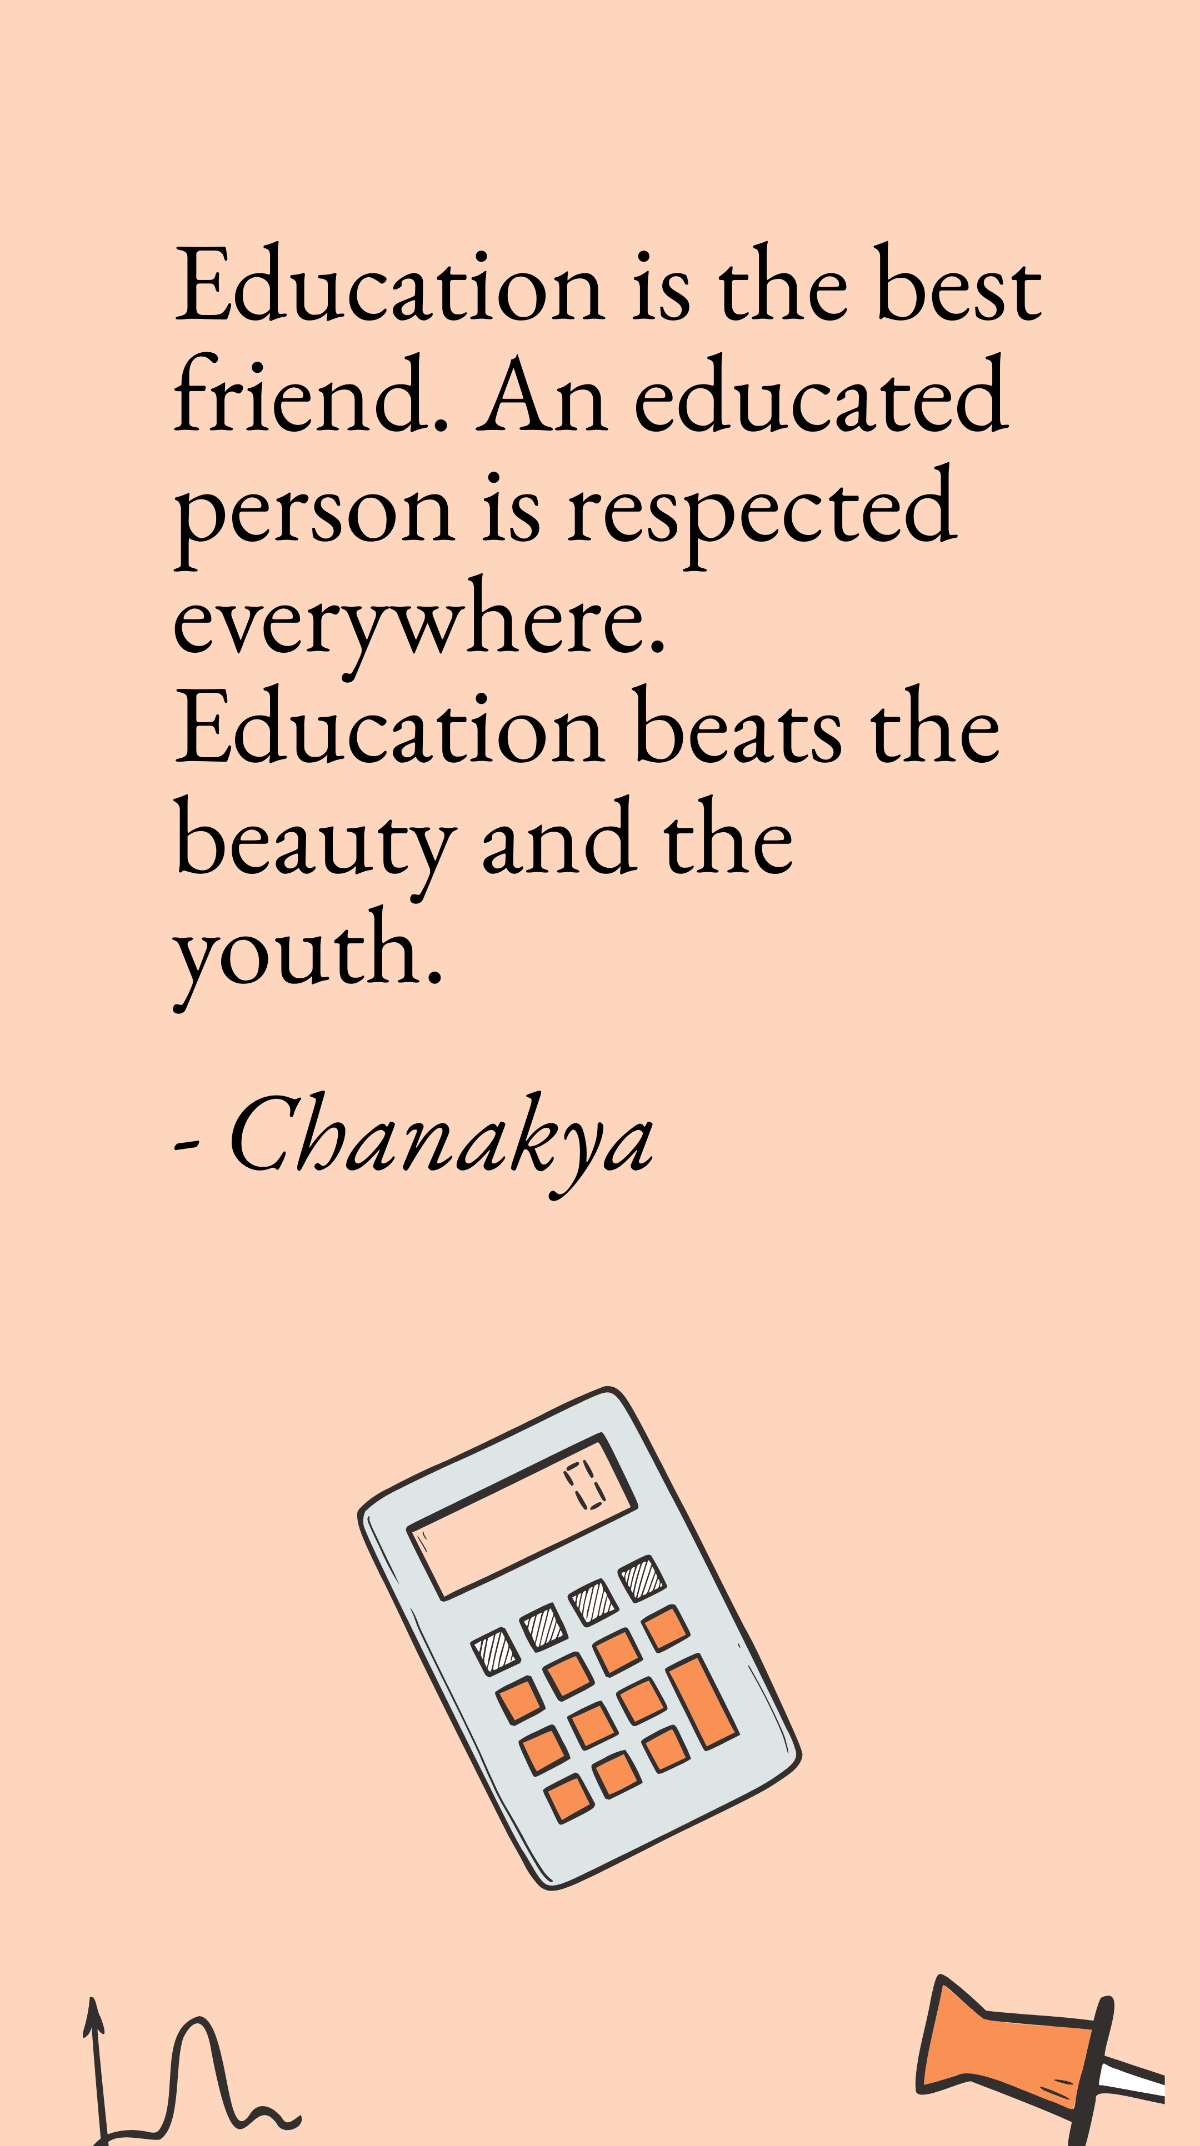 Chanakya - Education is the best friend. An educated person is respected everywhere. Education beats the beauty and the youth.